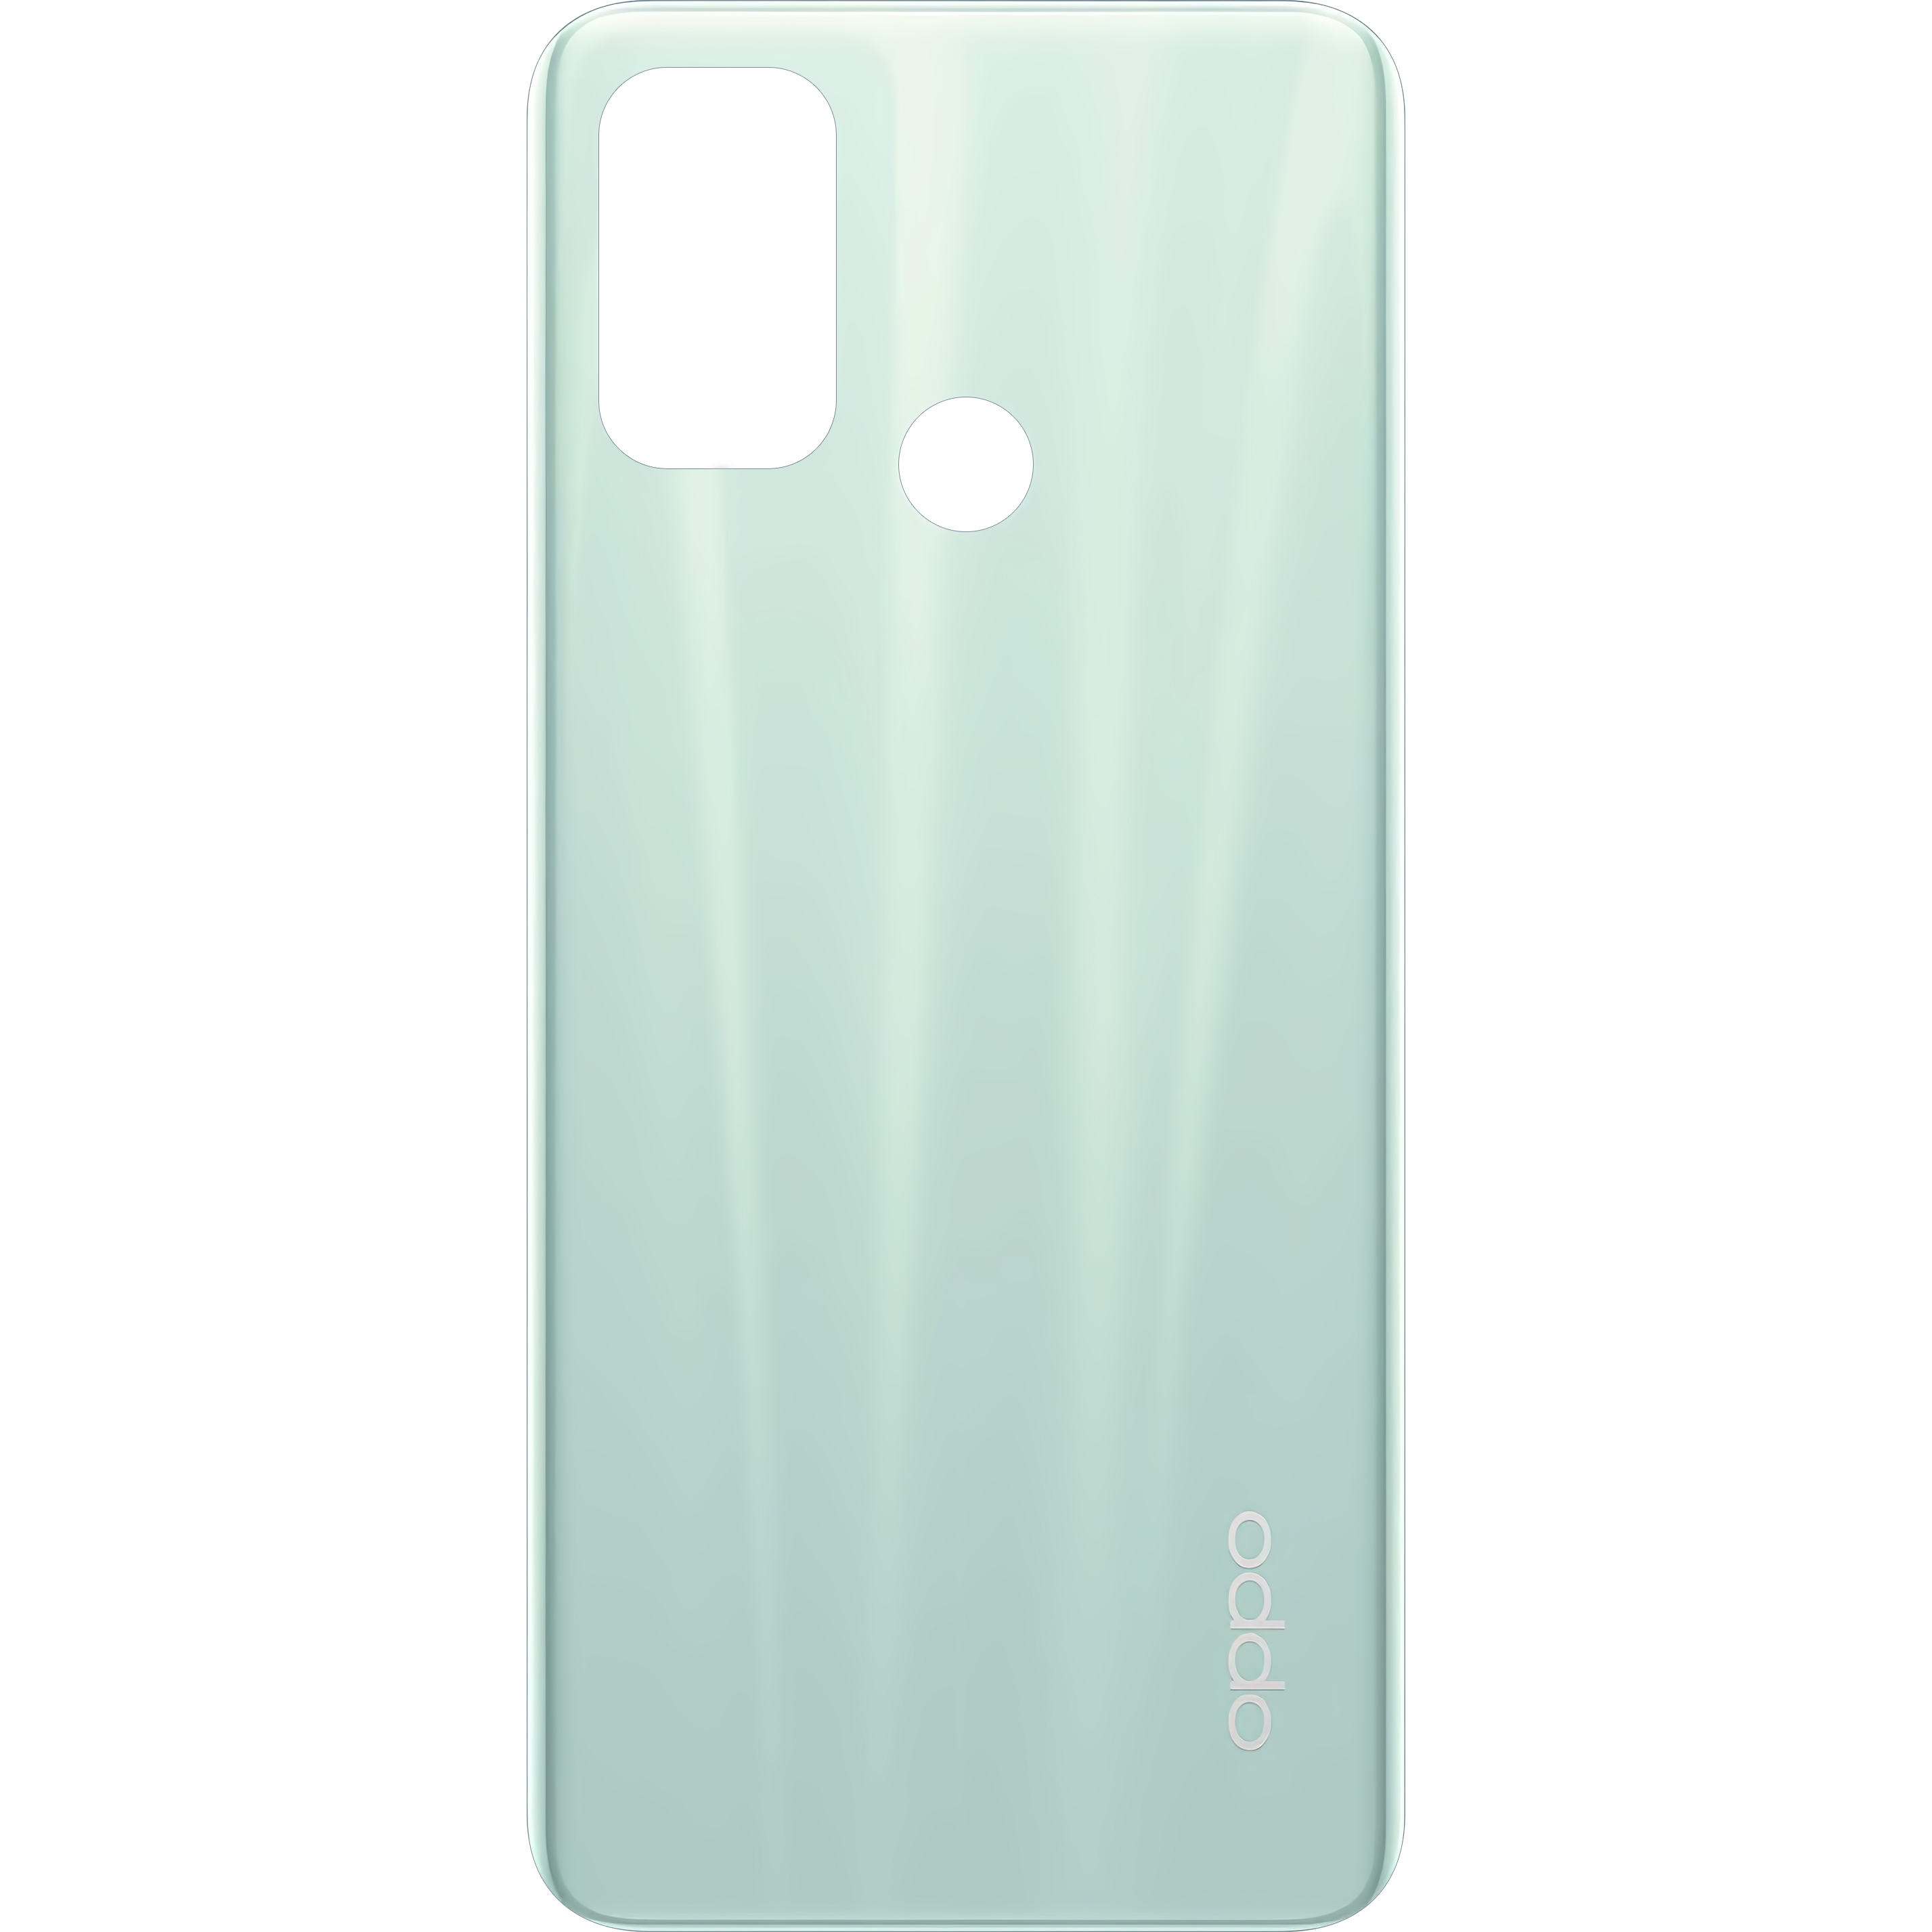 Capac Baterie Oppo A53 / Oppo A53s, Verde, Service Pack 3016781 